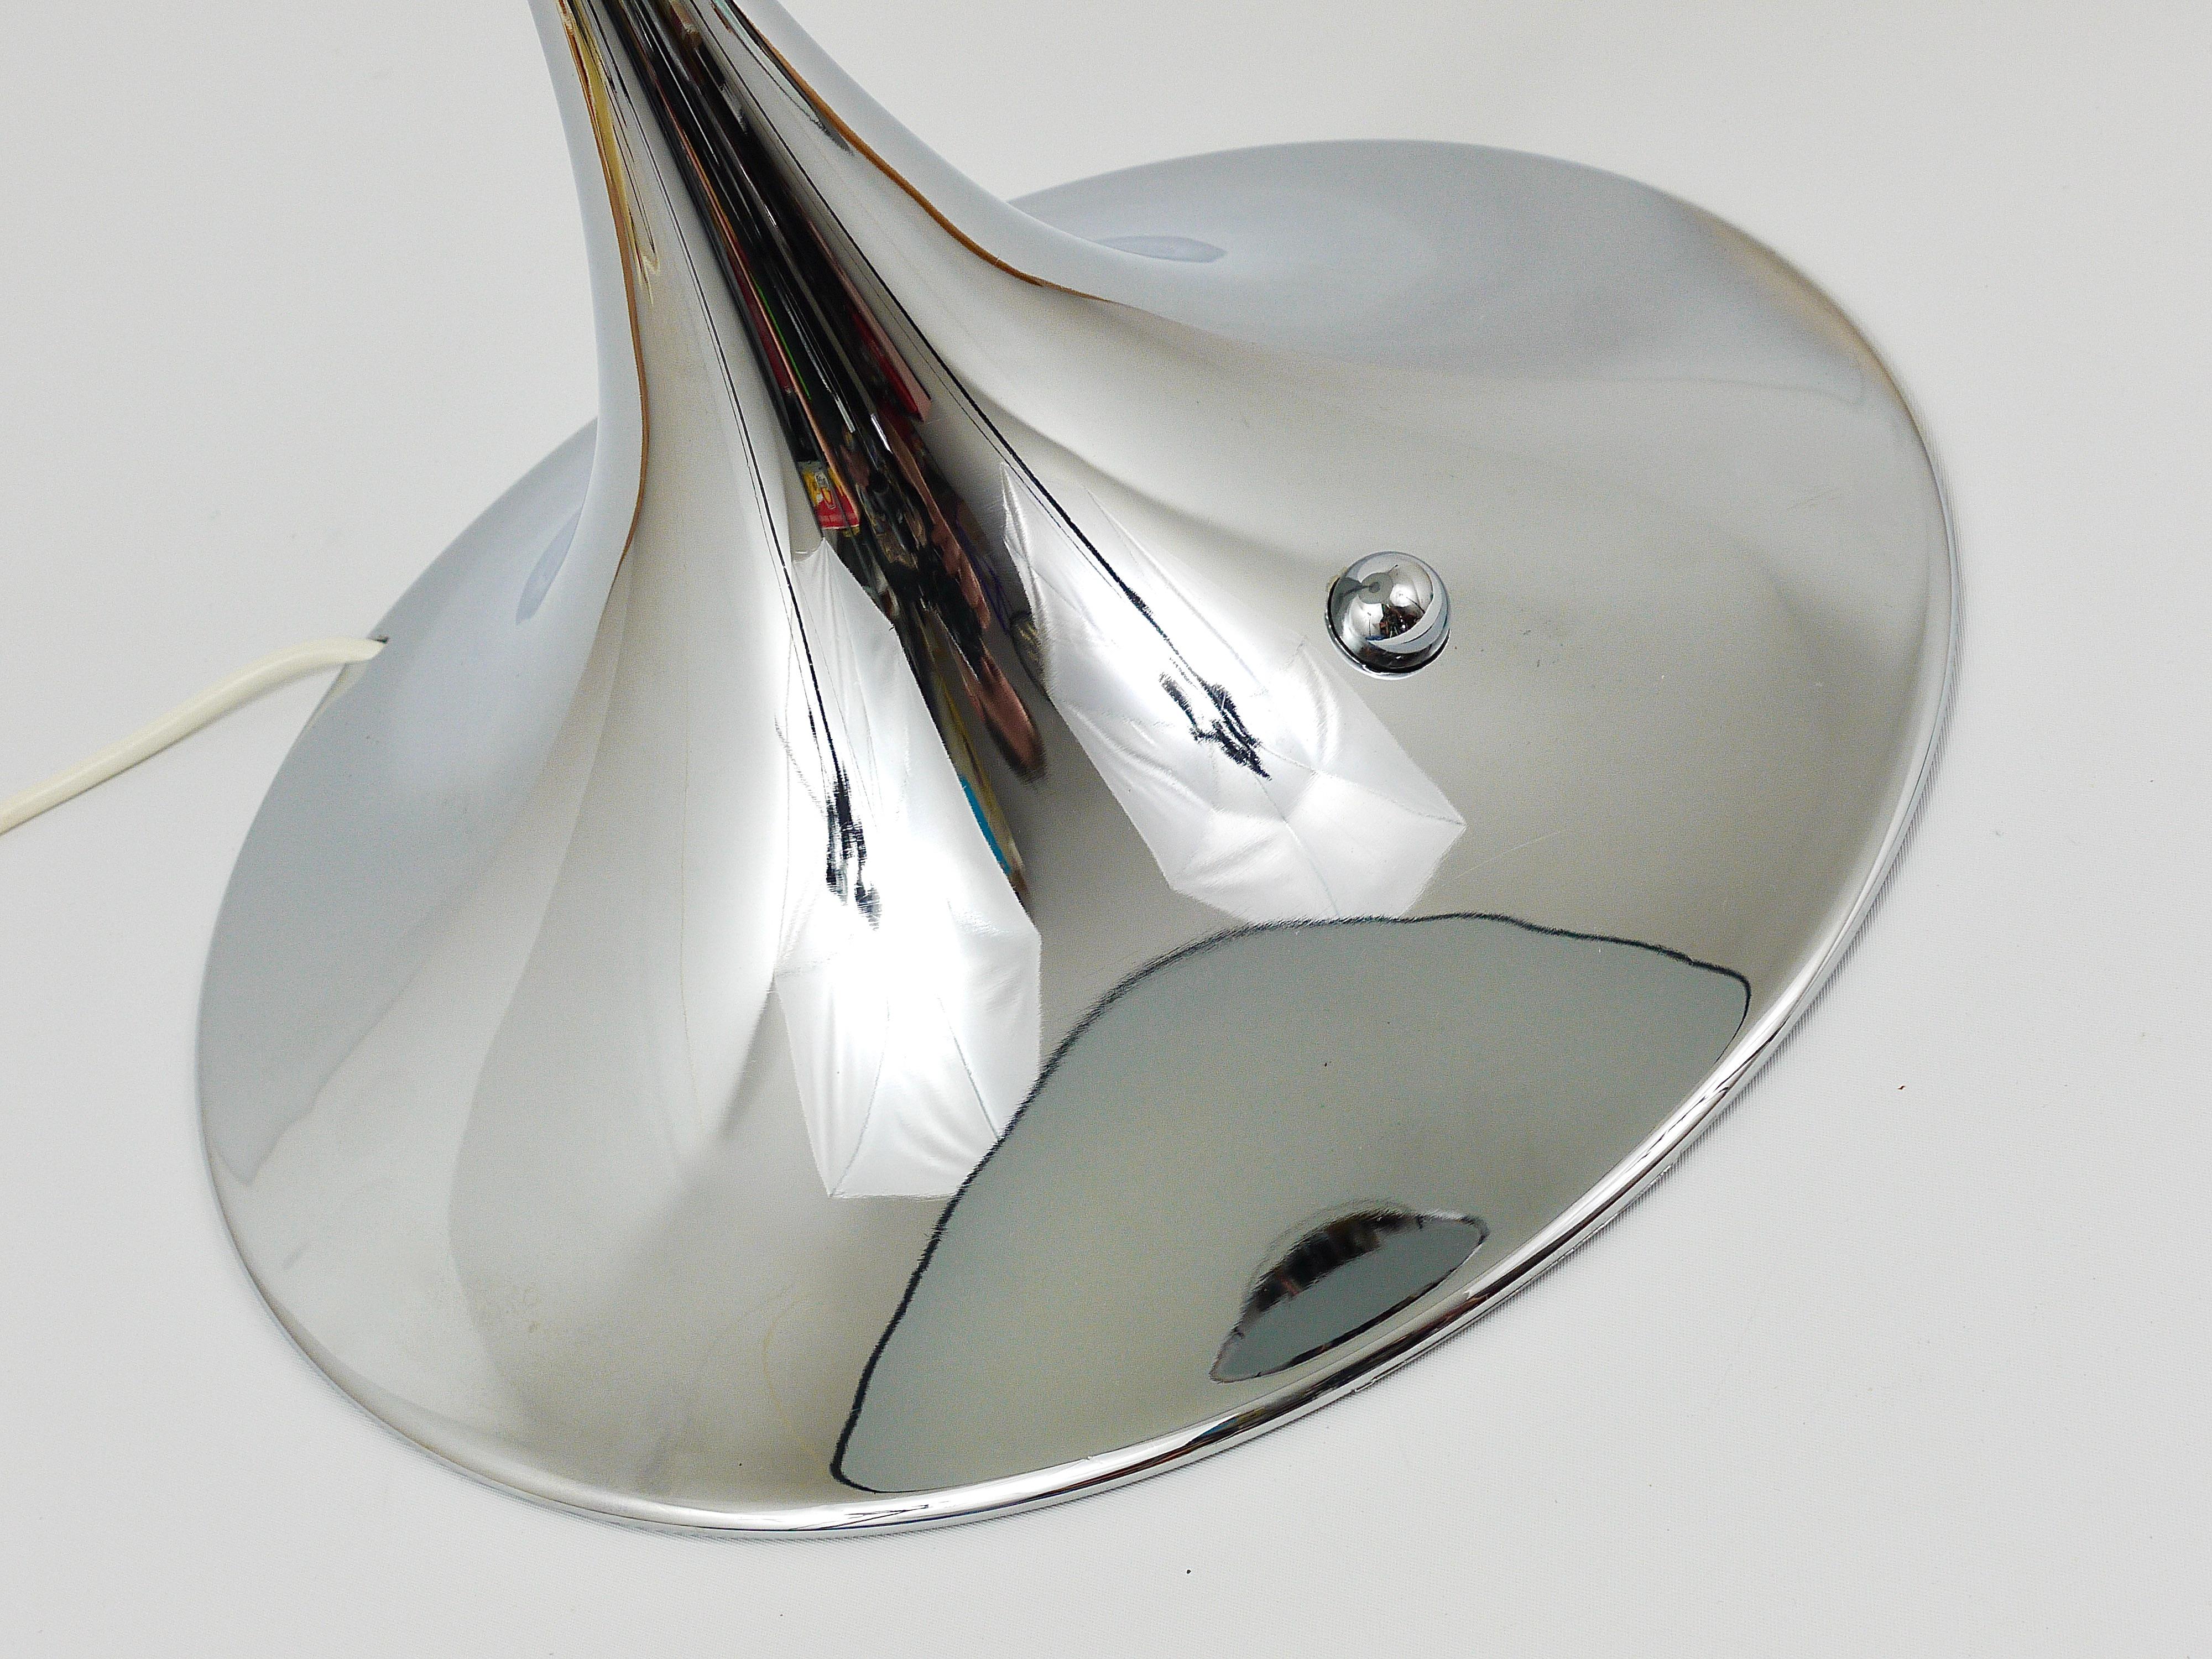 A large iconic table or side mushroom lamp, designed in 1971 by the Danish designer Verner Panton, executed by Louis Poulsen. This is one of the rare first early 1970s chrome editions with a fully-chromed base and a gradient-grey, round acrylic